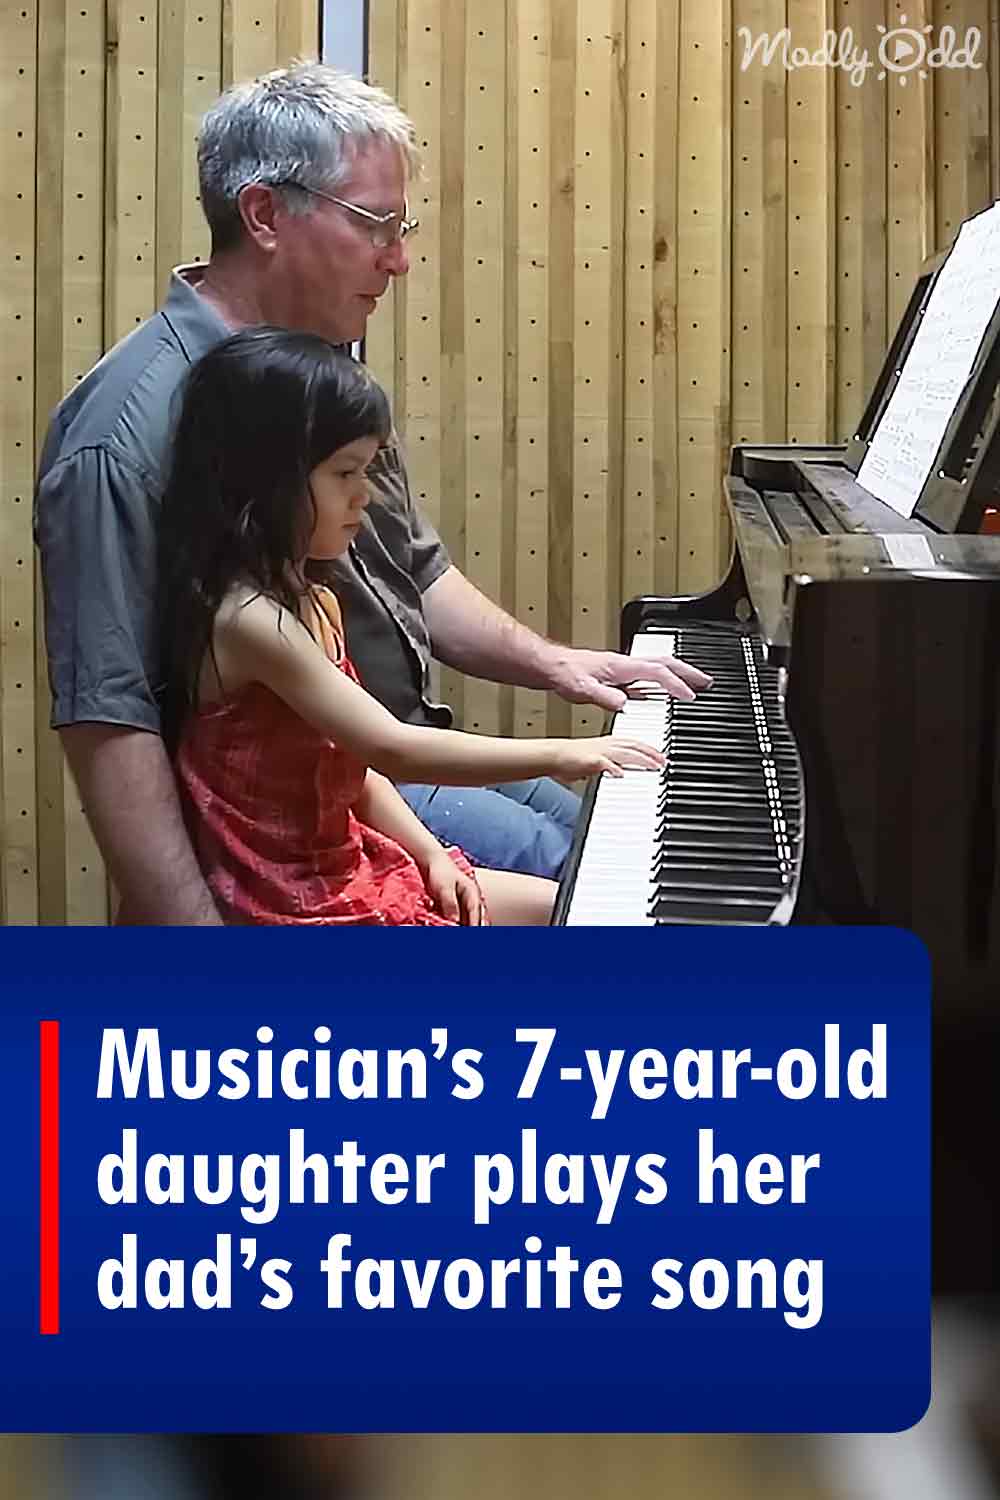 Musician’s 7-year-old daughter plays her dad’s favorite song